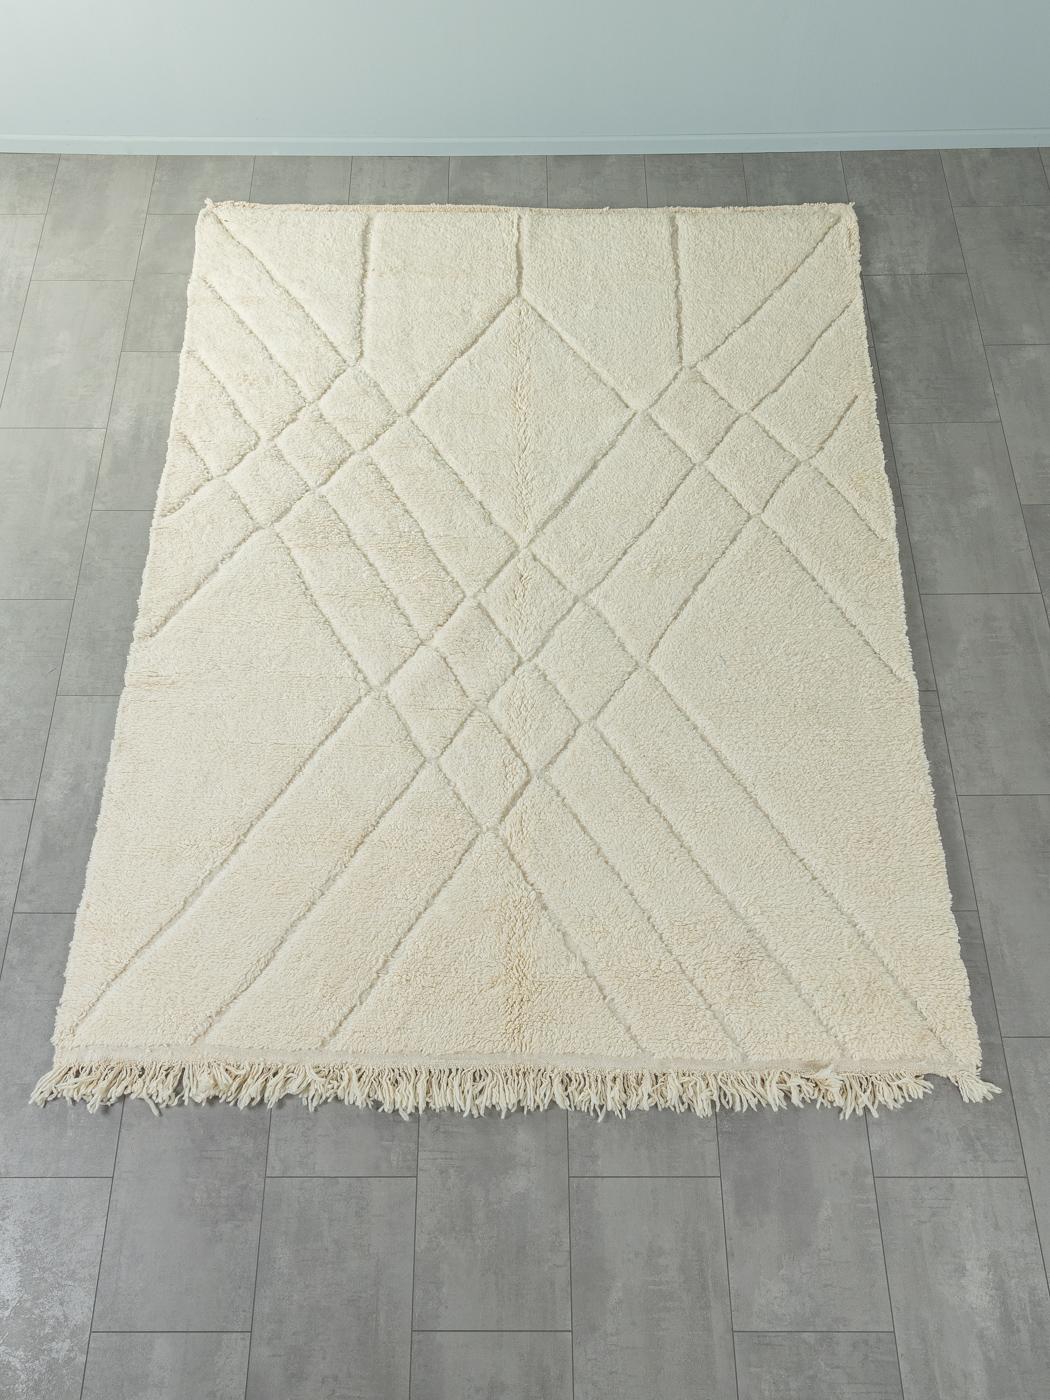 Dream catcher is a contemporary 100% wool rug – thick and soft, comfortable underfoot. Our Berber rugs are handwoven and handknotted by Amazigh women in the Atlas Mountains. These communities have been crafting rugs for thousands of years. One knot